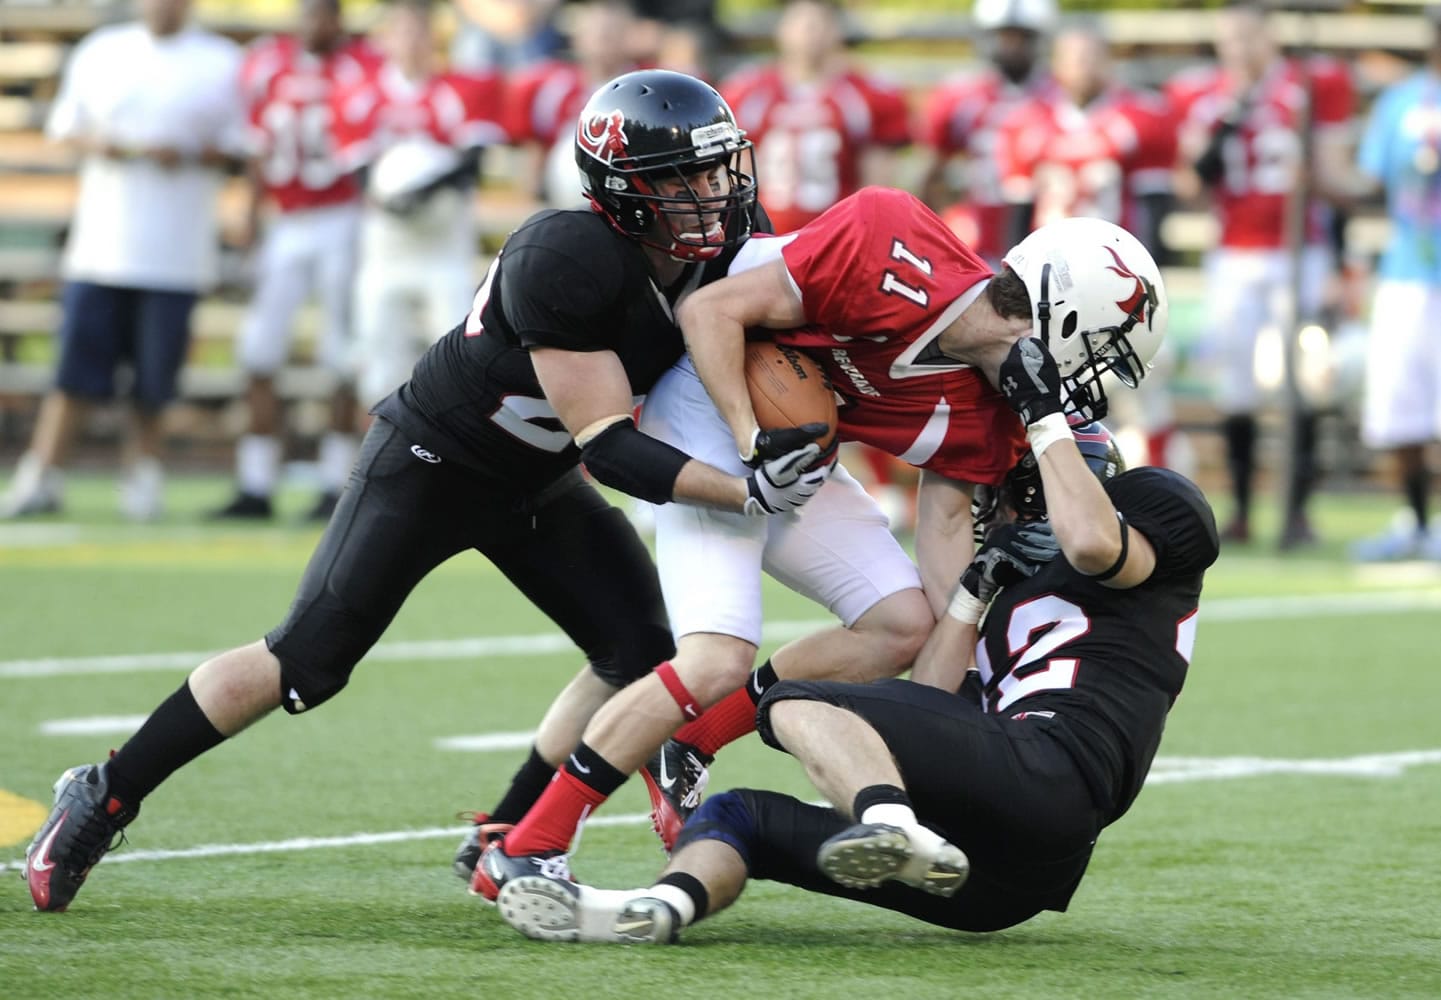 Vipers players Igor Ivanov, left, and Michael Ivanov pull down a Southern Oregon Renegades player during a football game at Kiggins Bowl on Saturday.